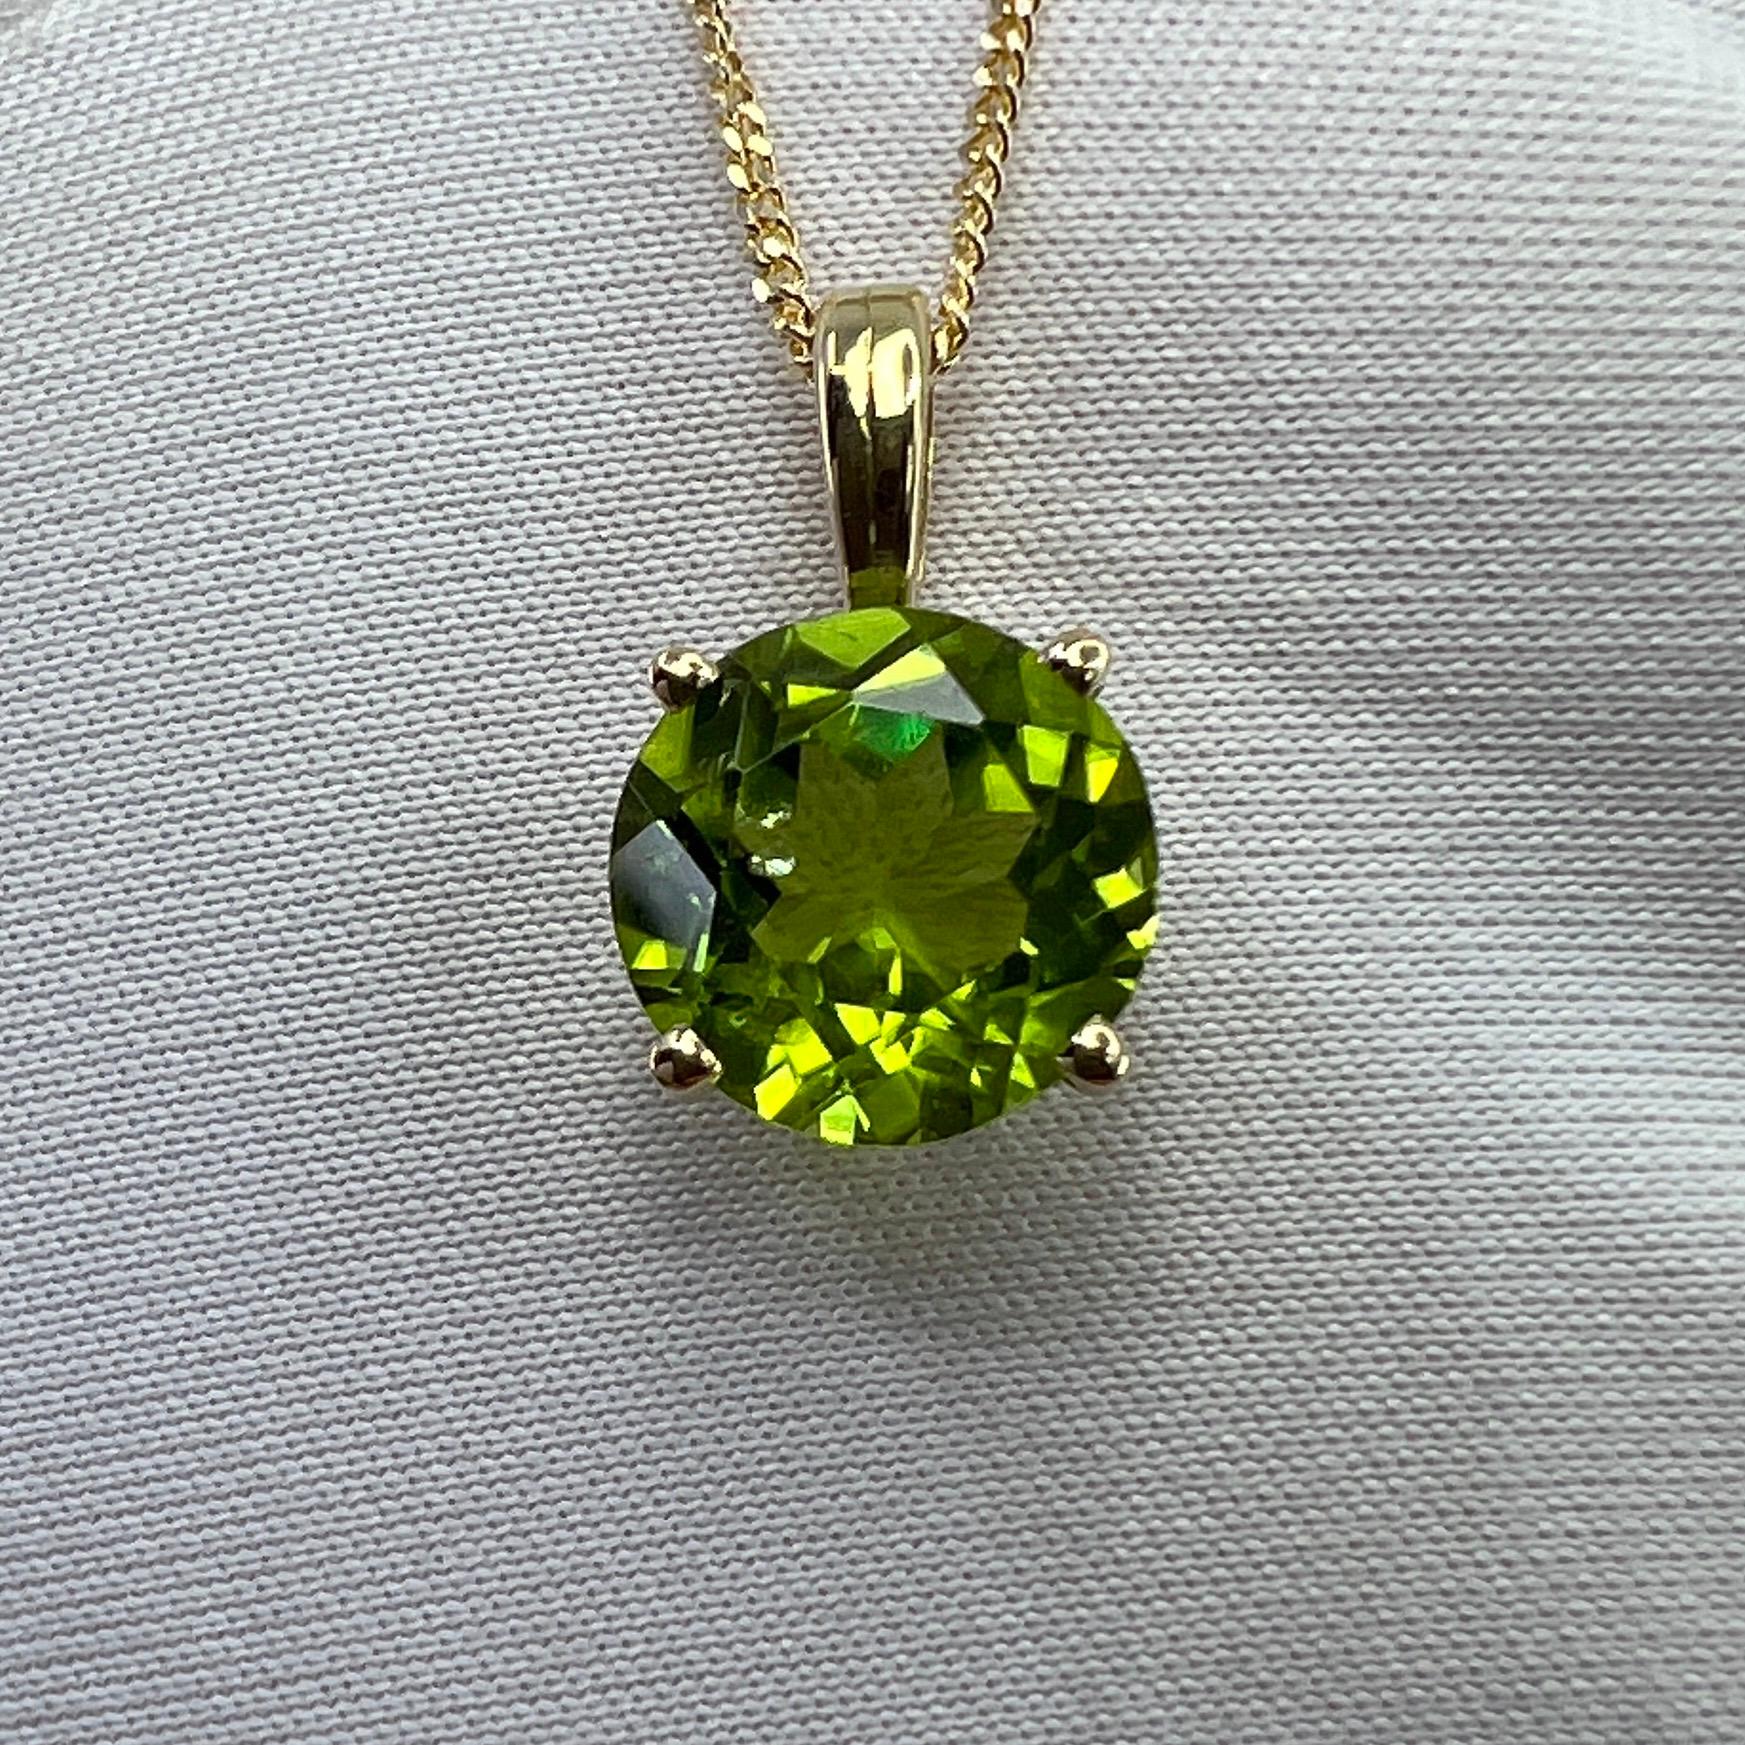 Beautiful 3.13 carat natural vivid green peridot set in a fine 18k yellow gold solitaire pendant.

Stunning peridot with a bright and vivid green colour and good clarity, clean stone with only some small natural inclusions visible when looking